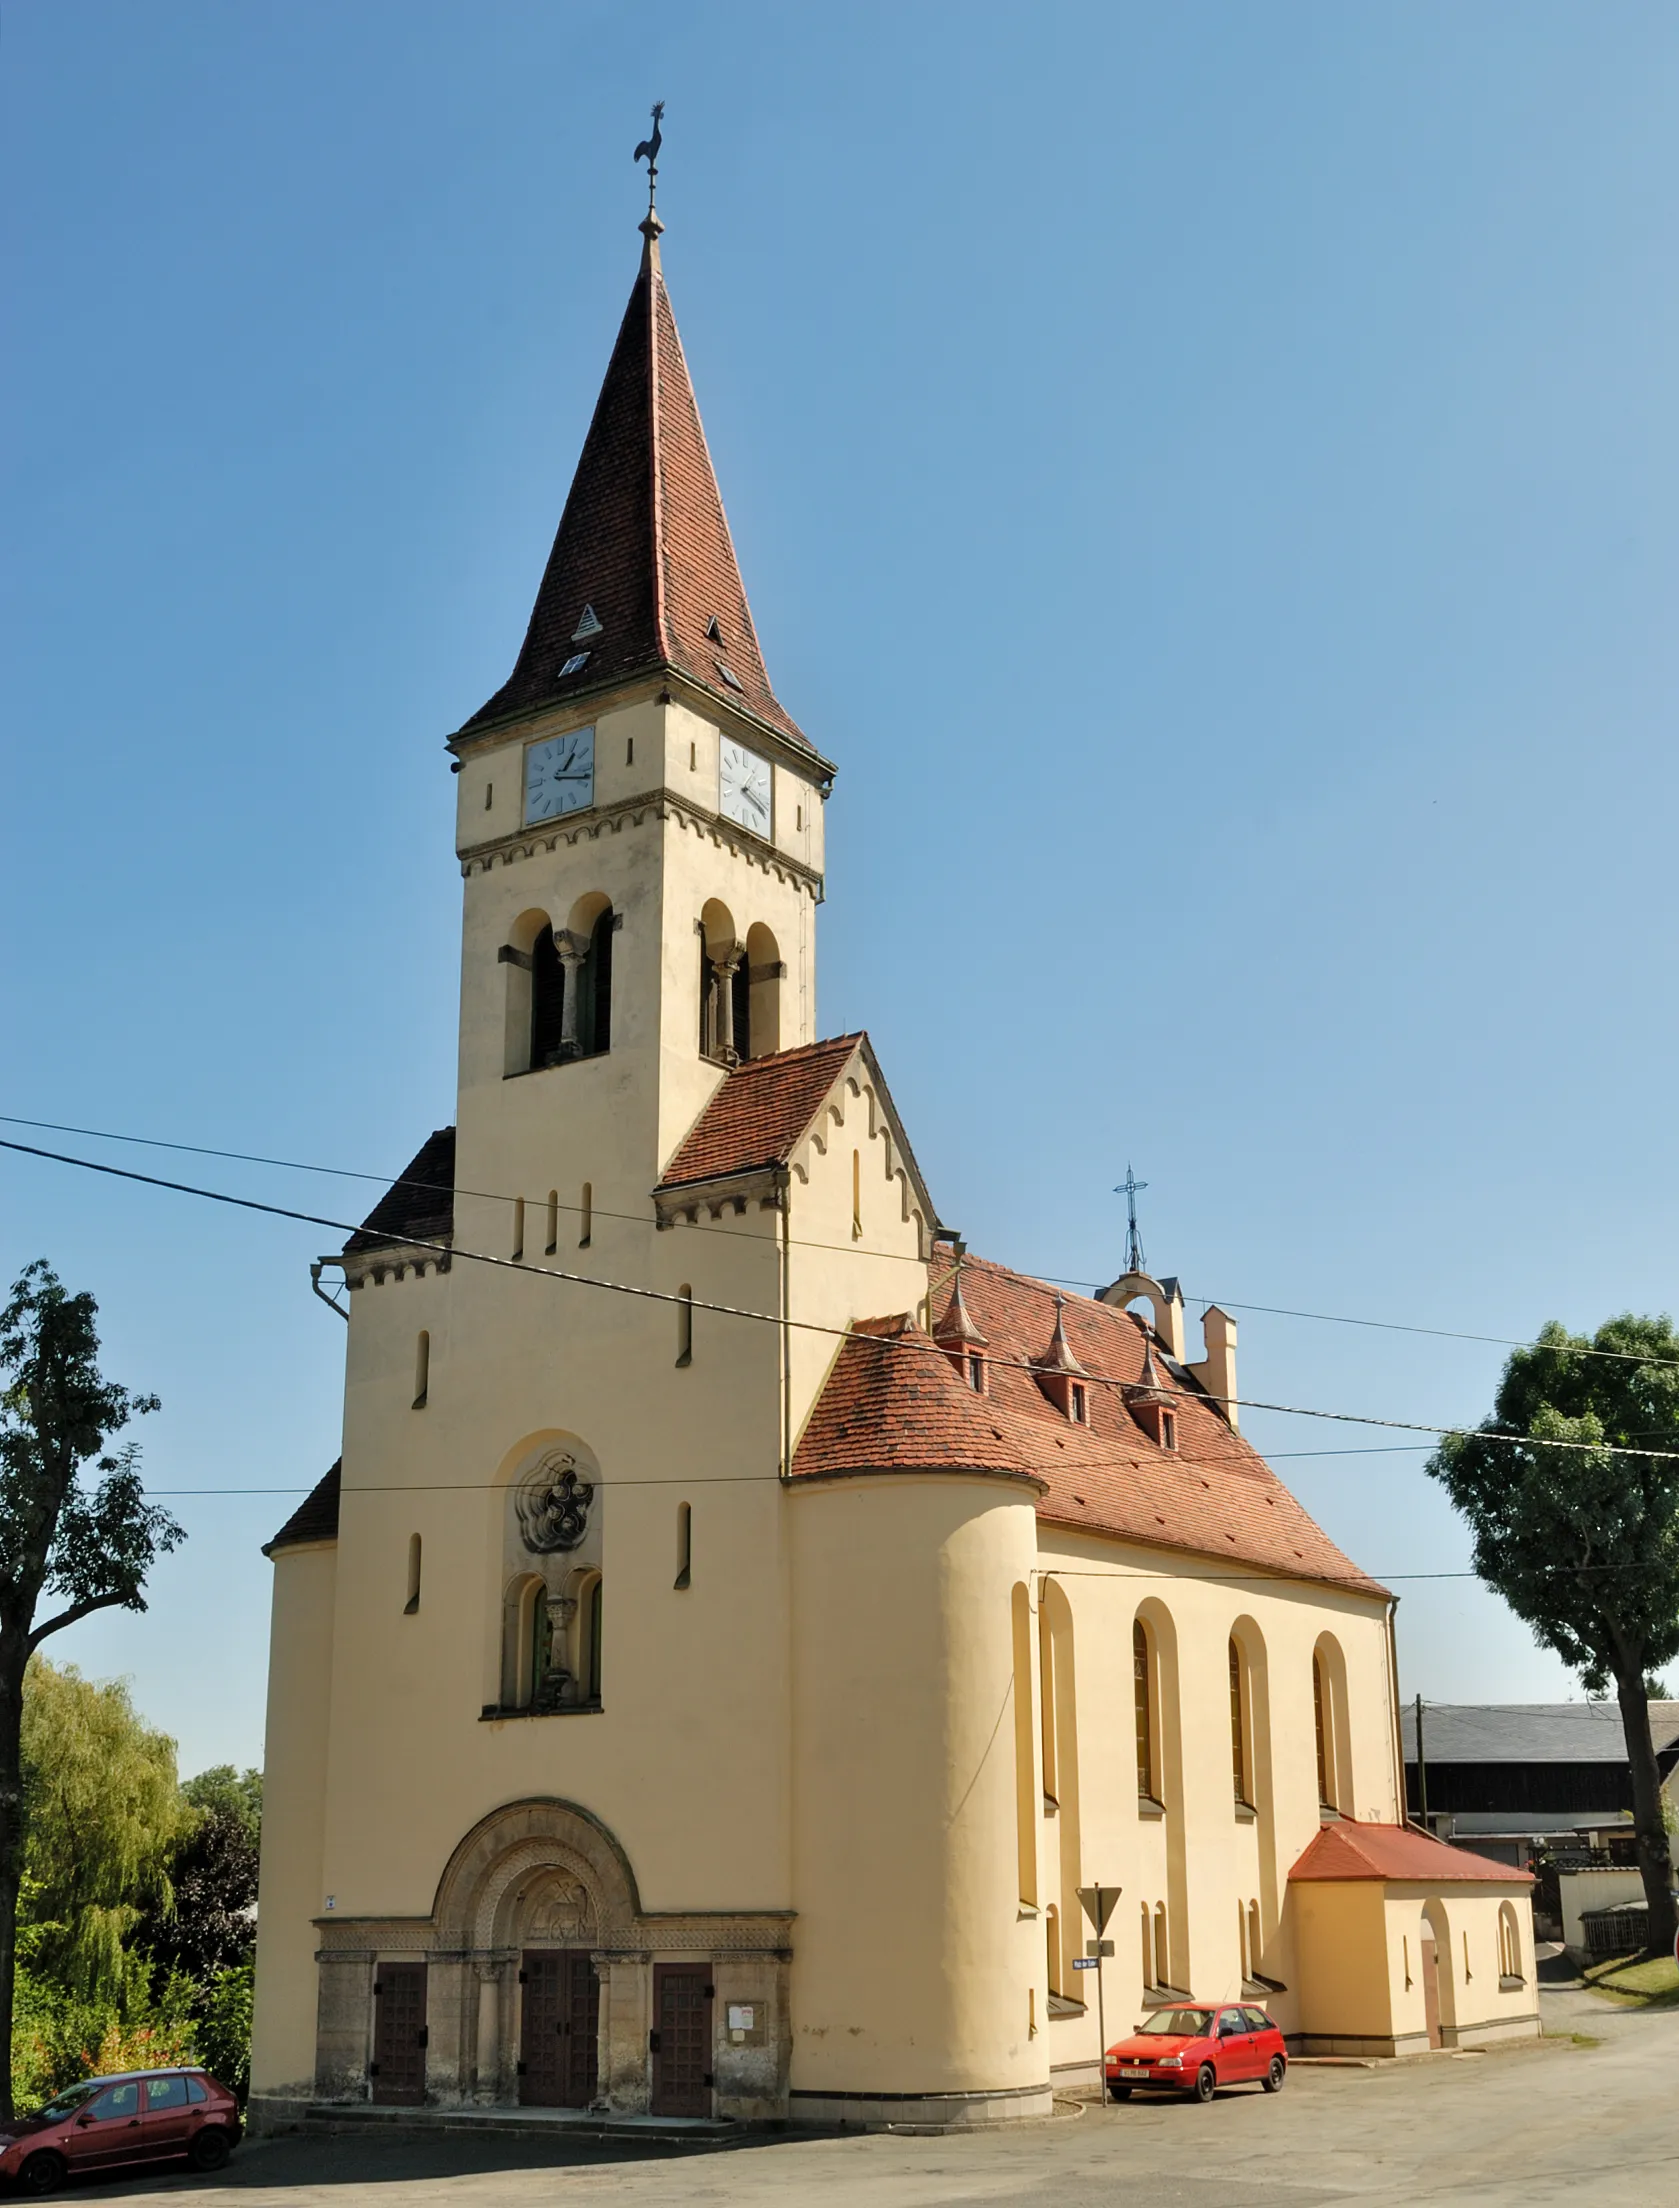 Photo showing: This image shows the church in Brockau, Saxony